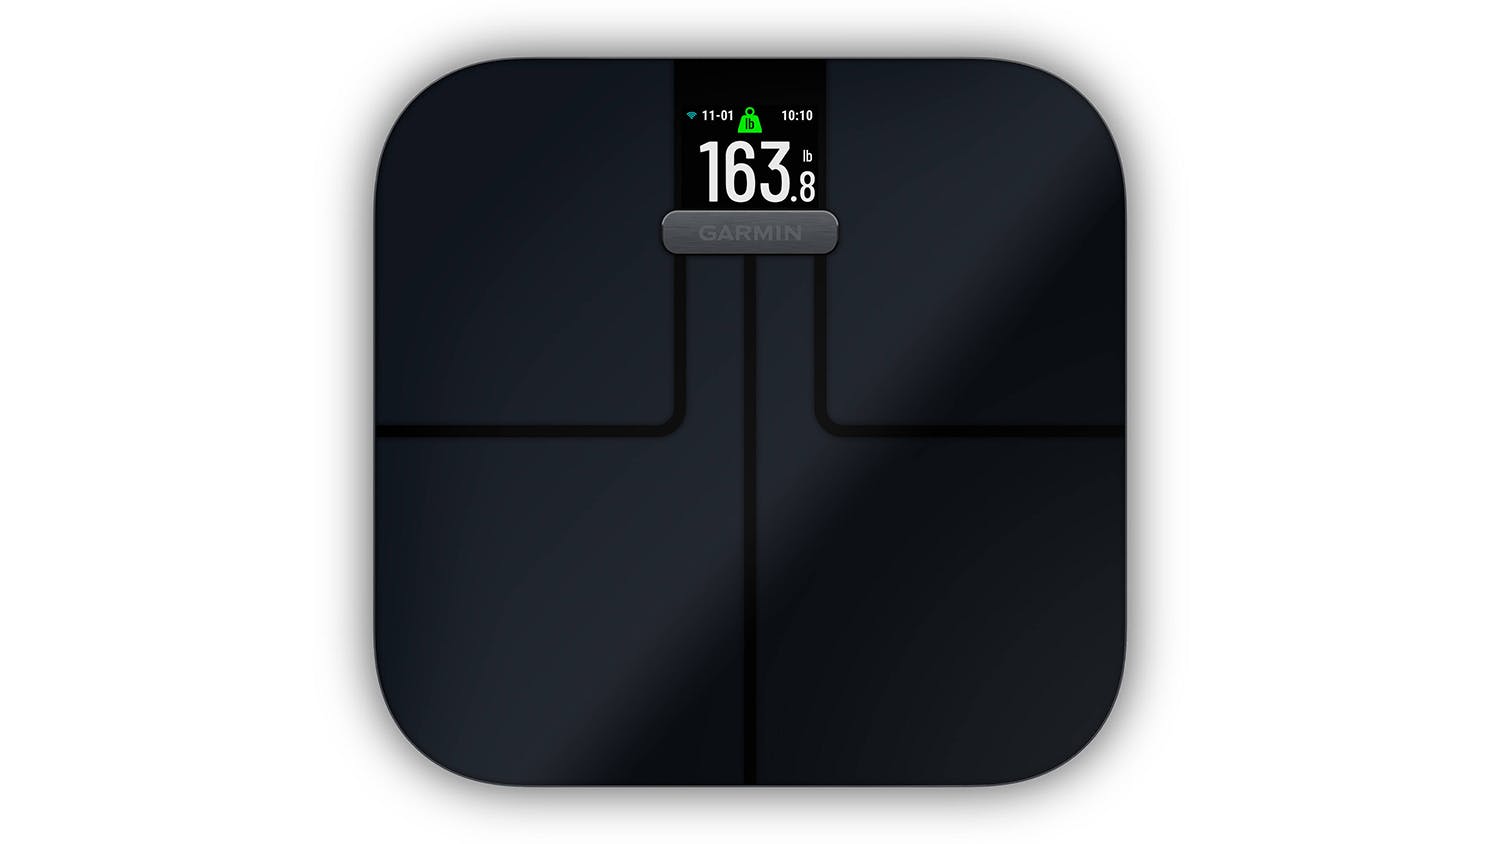 Garmin Index S2 Guide - Apps on Google Play